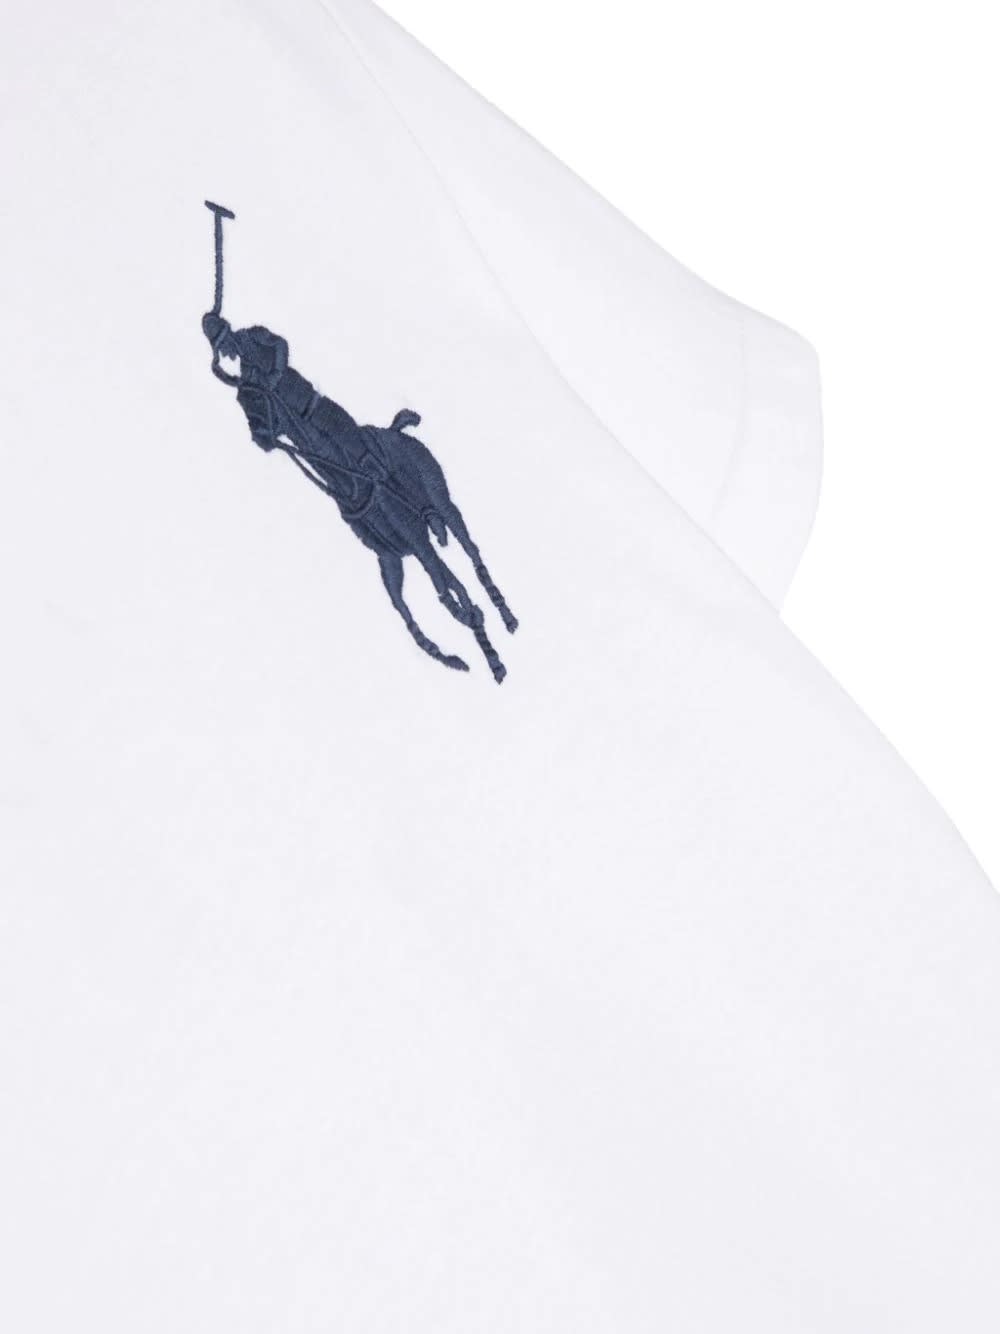 Shop Ralph Lauren Pony Polo T-shirt In White And Blue